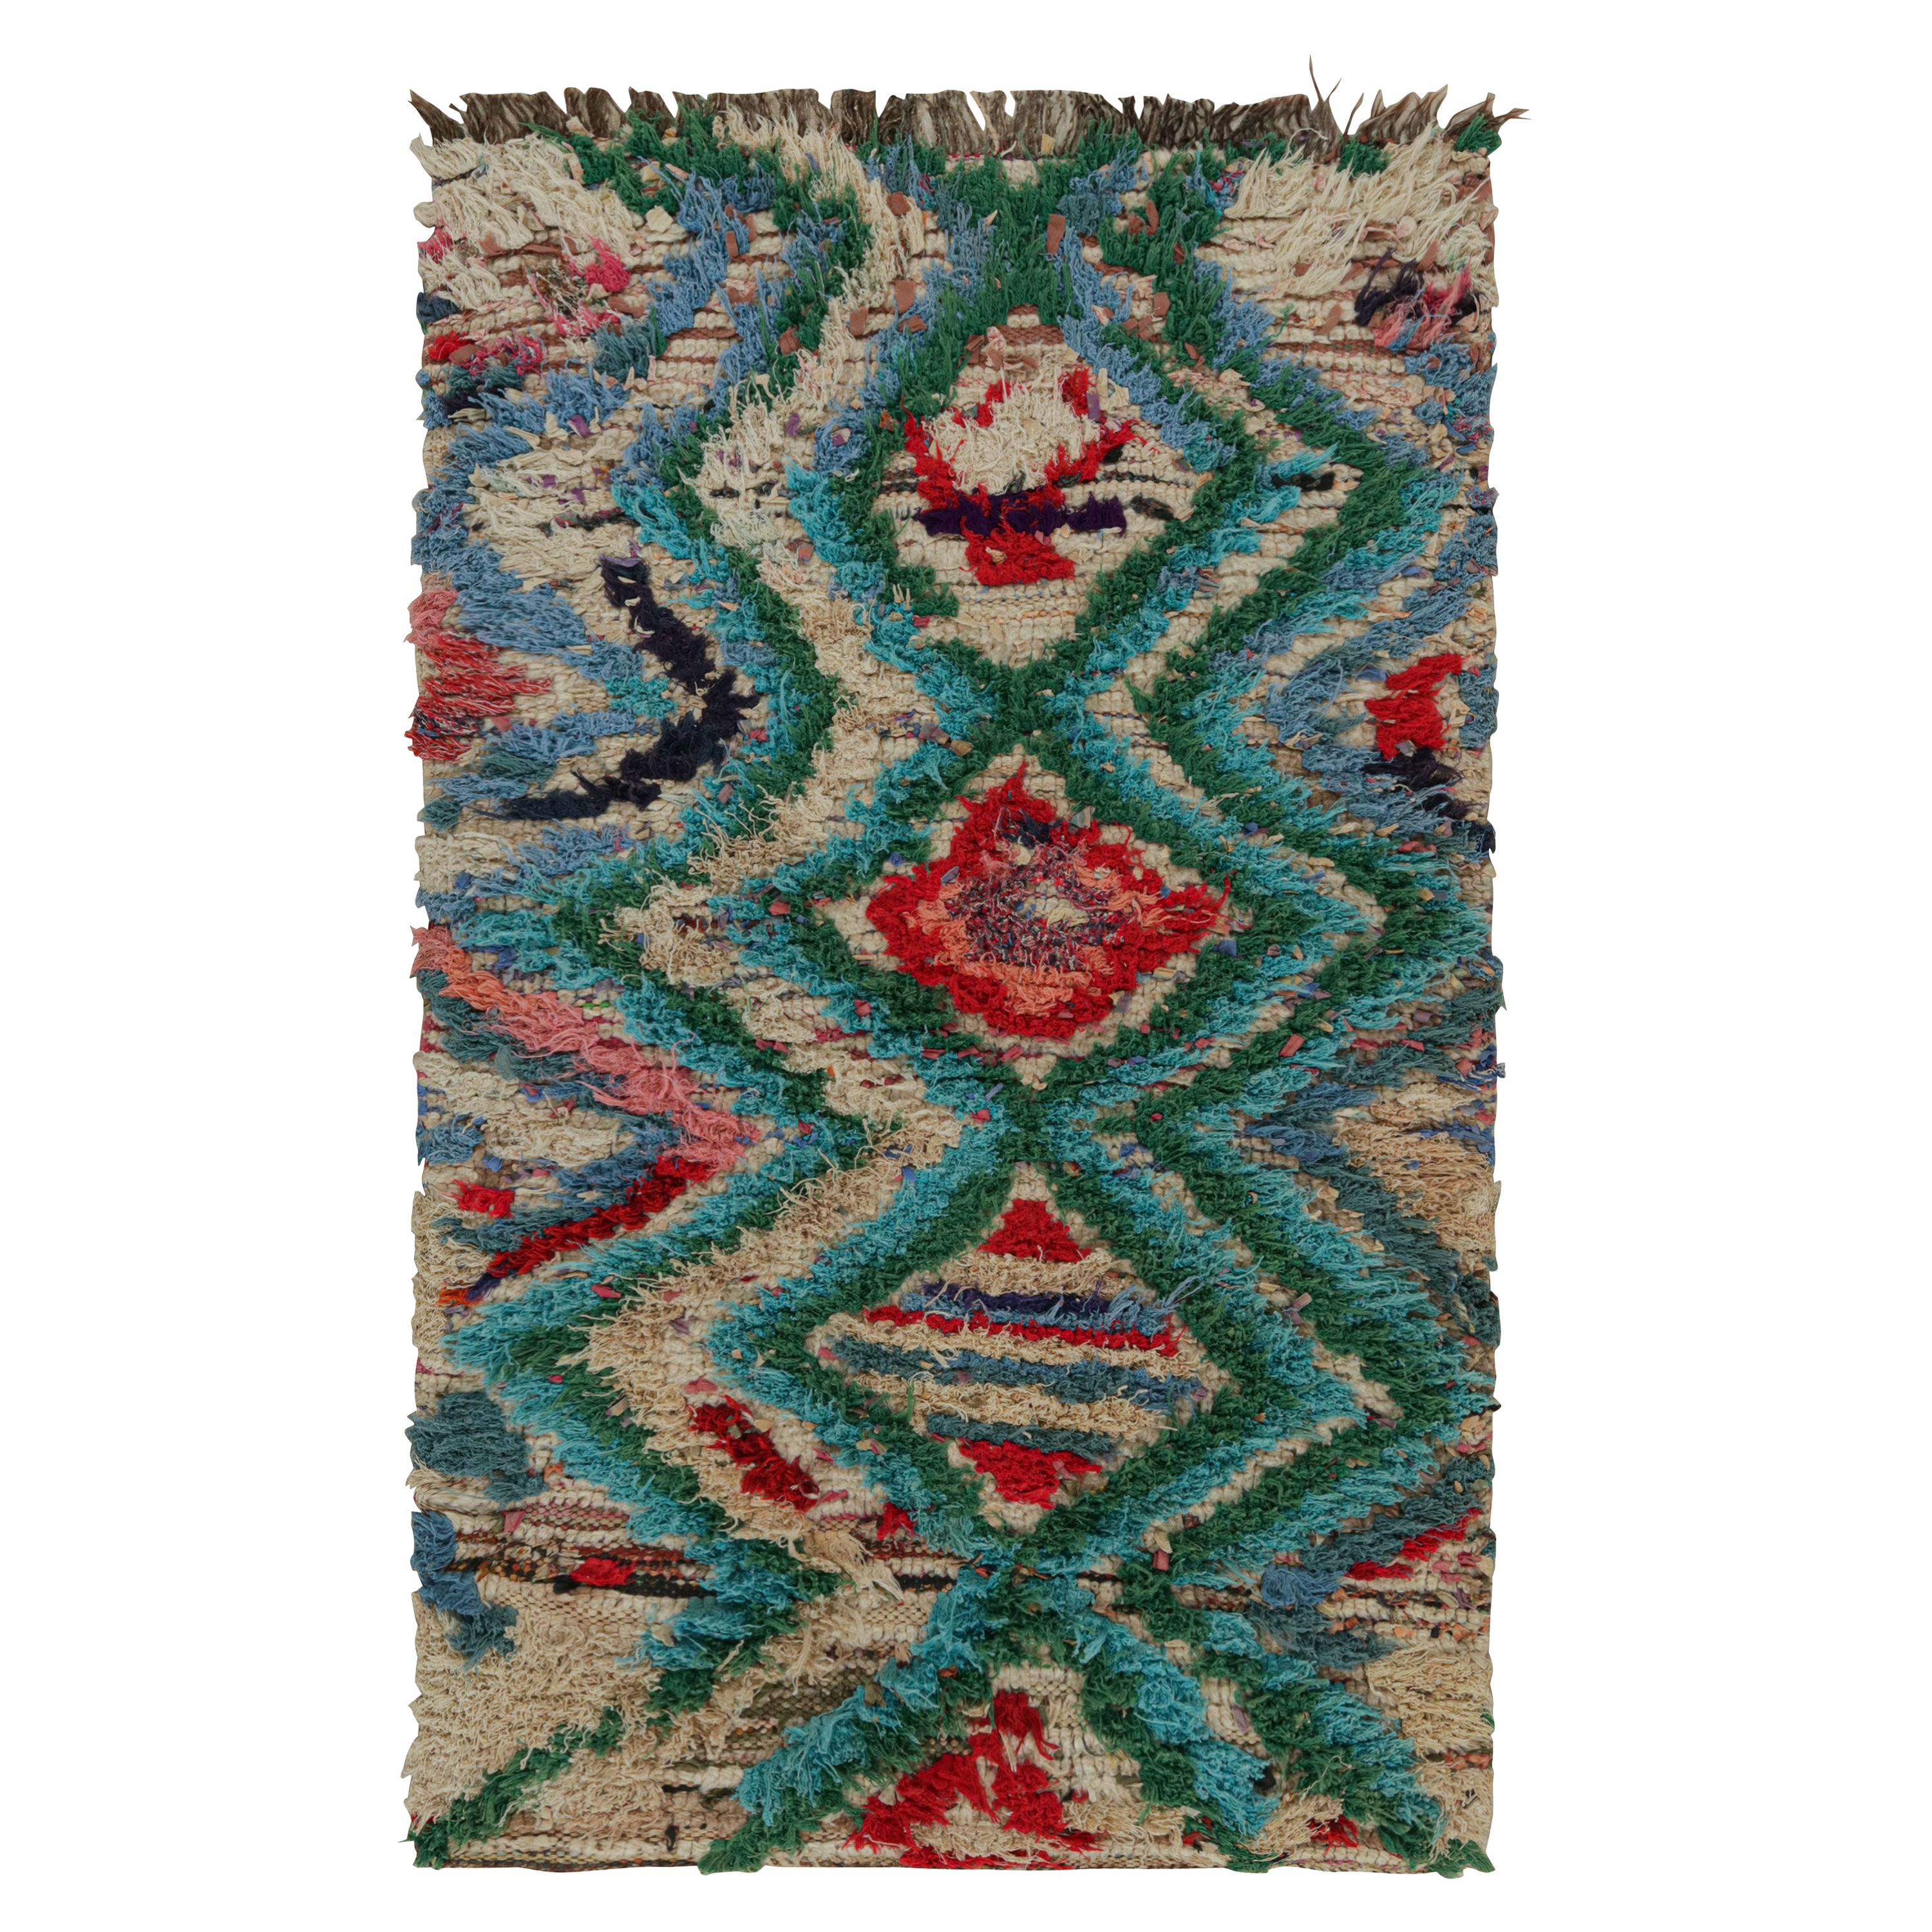 Vintage Moroccan Runner Rug with Diamond Patterns, from Rug & Kilim 